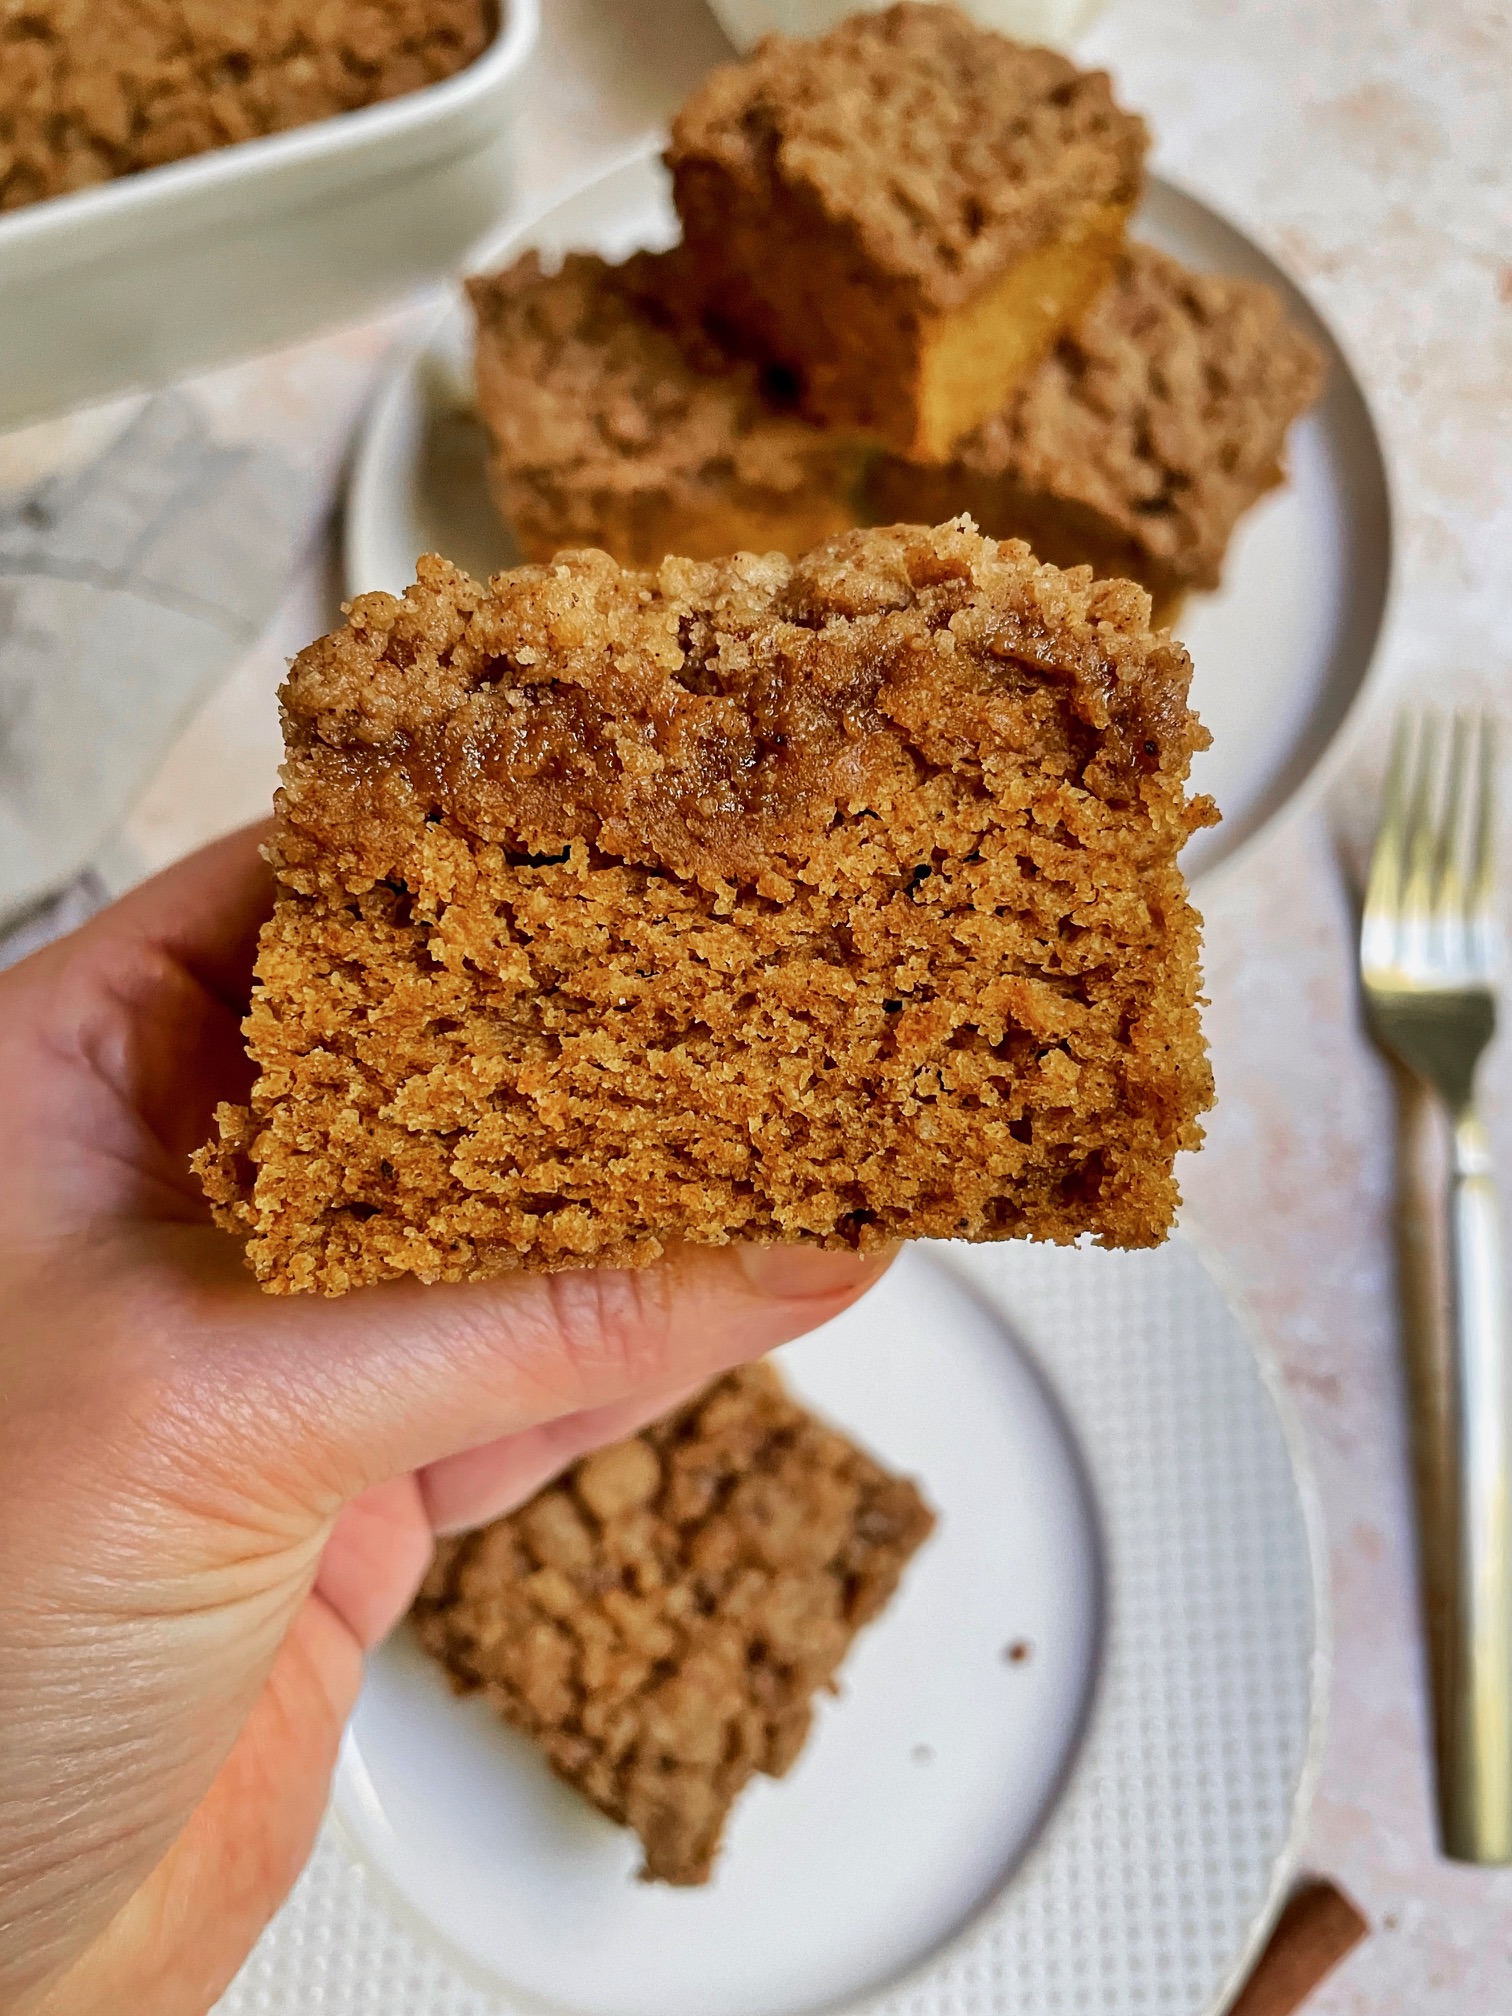 Holding up a piece of pumpkin coffee cake close to the camera to show the cake texture.